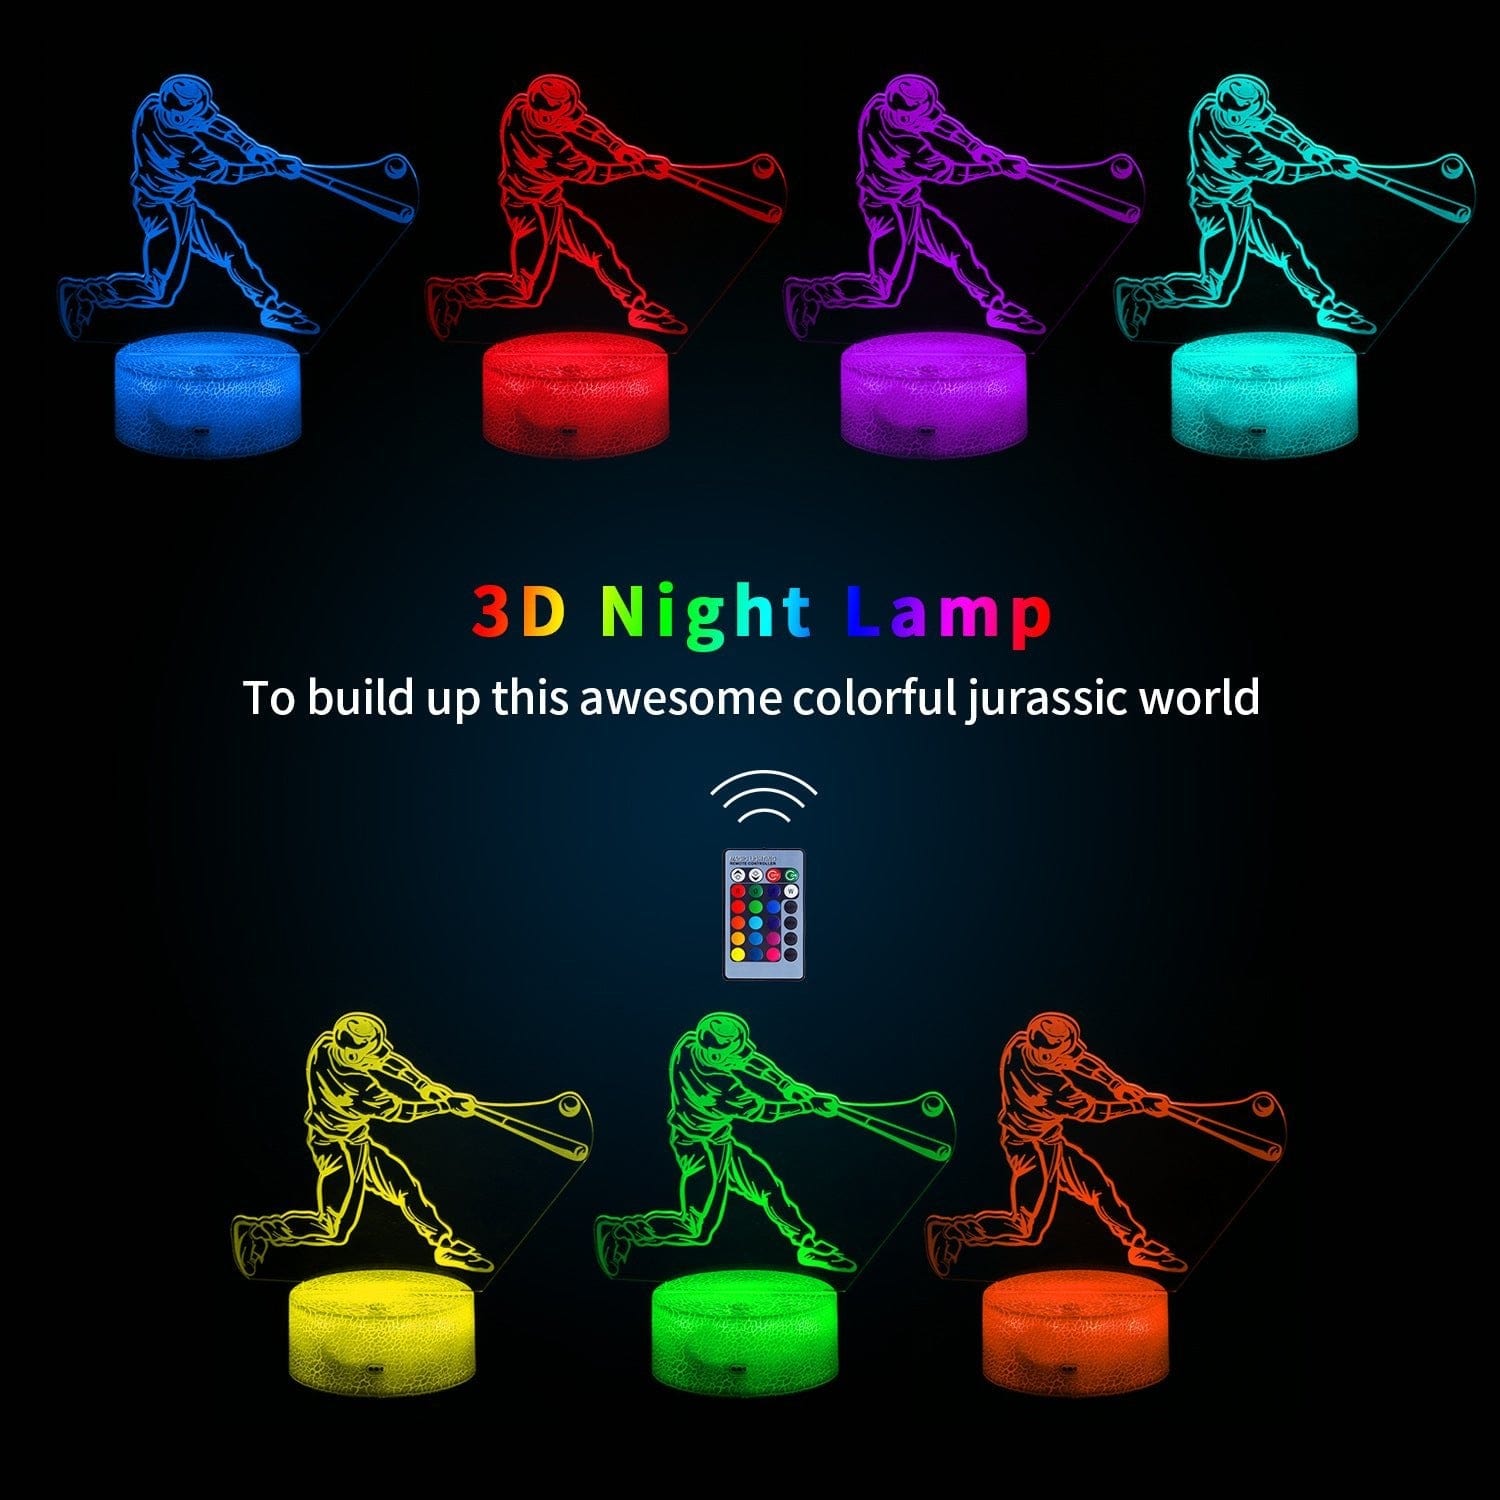 Gift 3D Night Light Touch Remote Control Acrylic Cylindrical Base Light Crack 16 Colors RGB - CLASSY CLOSET BOUTIQUEGift 3D Night Light Touch Remote Control Acrylic Cylindrical Base Light Crack 16 Colors RGB40097788871C4BFF981881AACCCCFFFB